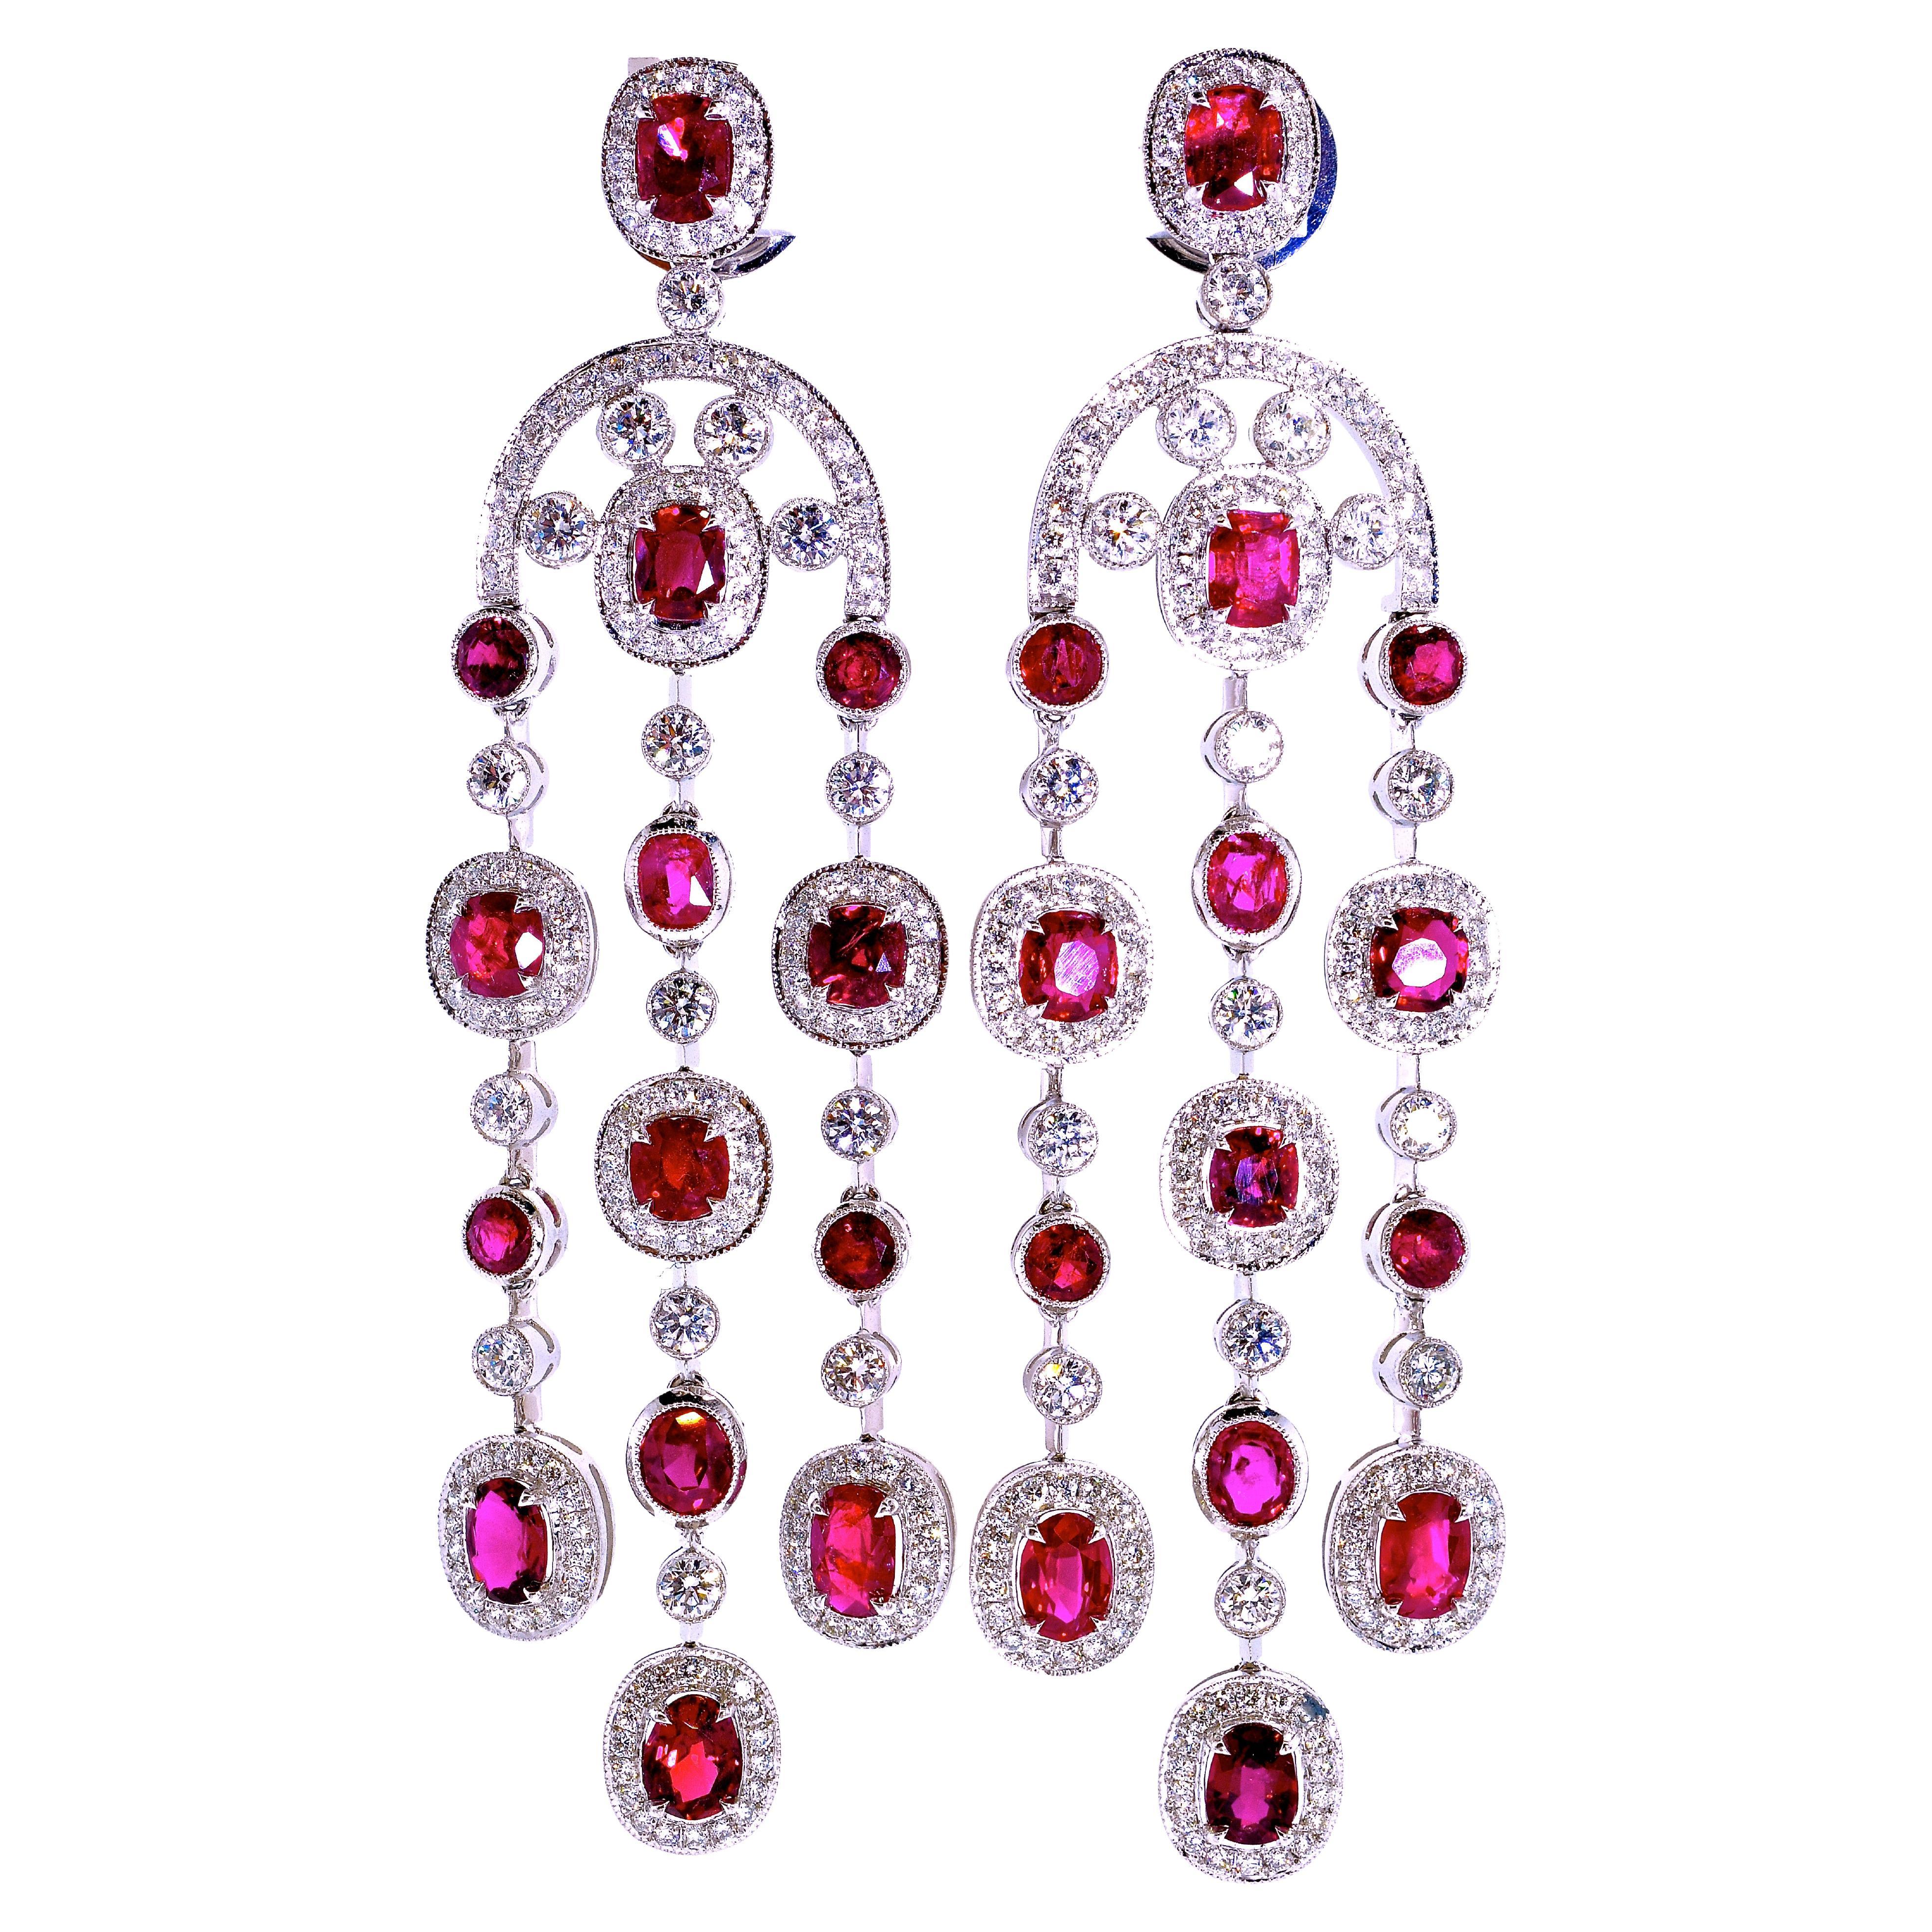 Unheated Natural Rubies set in platinum chandelier earrings, these vivid red rubies possessing GIA certificates which state that the fine matched rubies are unheated and untreated. There are 10.29 cts of fine vivid red rubies in 28 round well cut